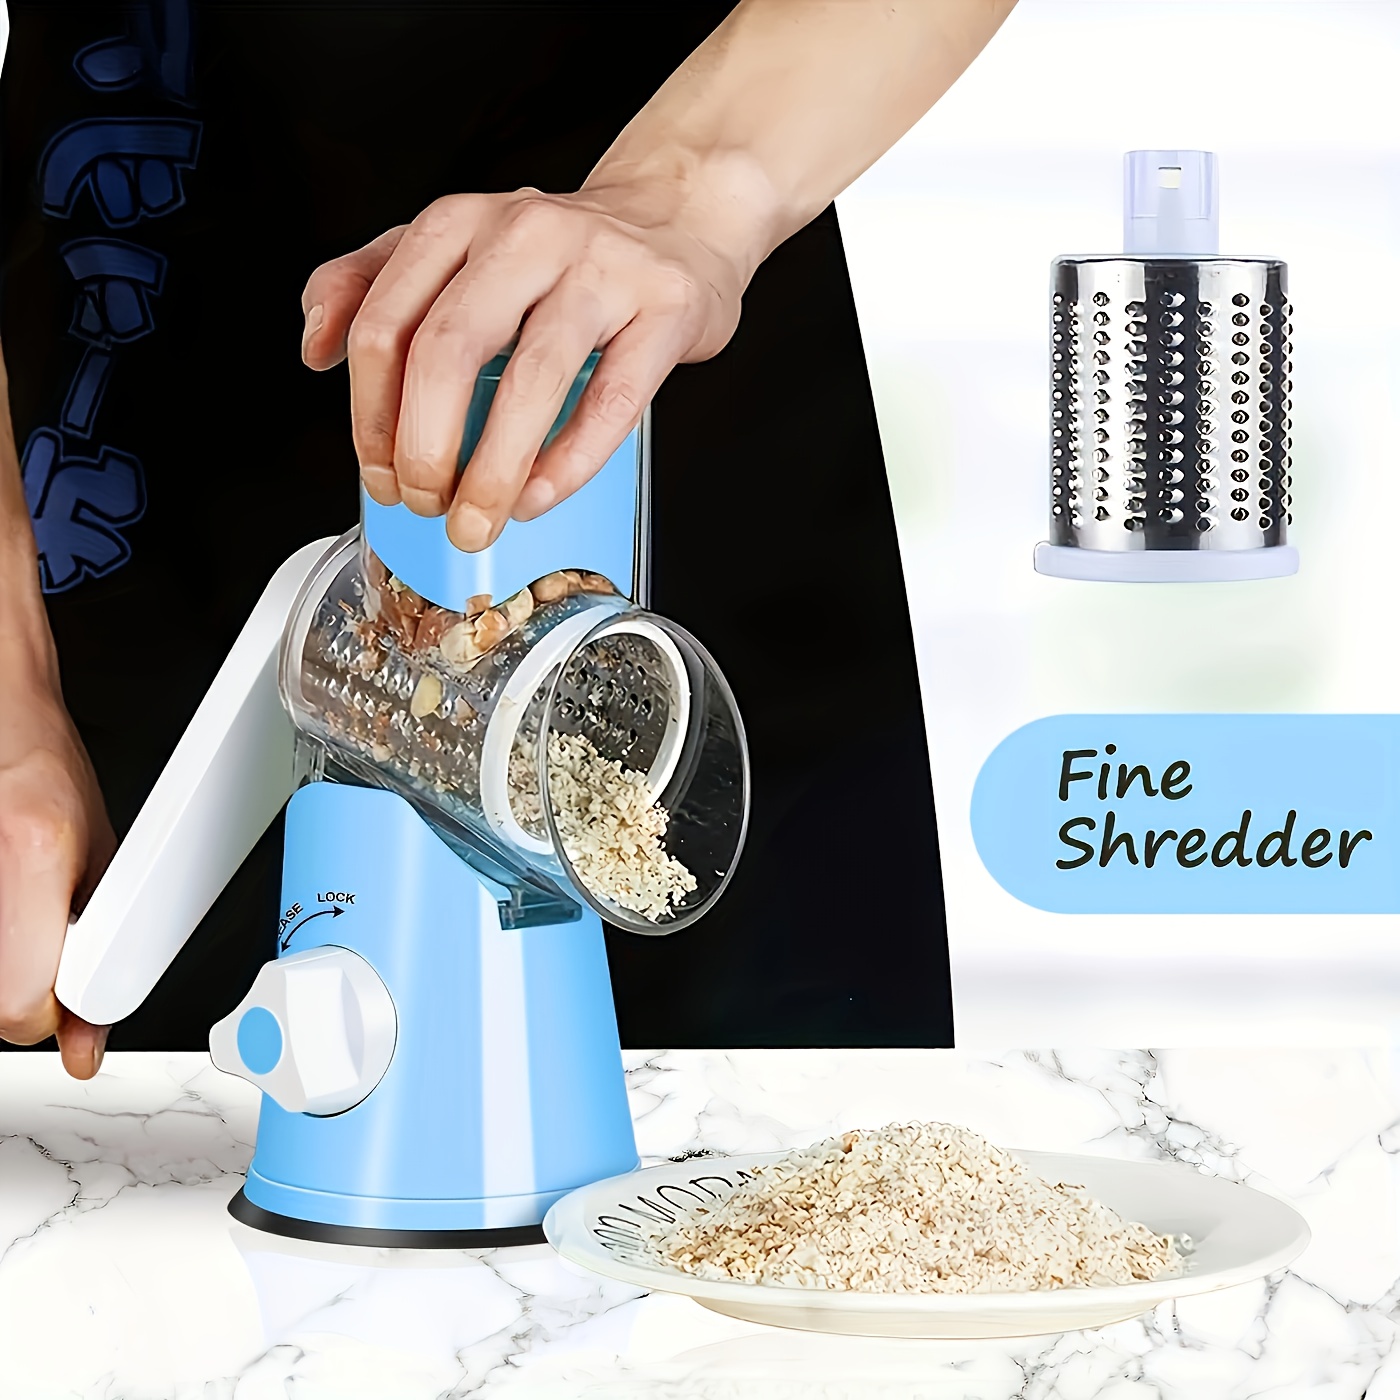 3 in 1 Cheese Grater with Handle Rotary Cheese Slicer with 3 Drum